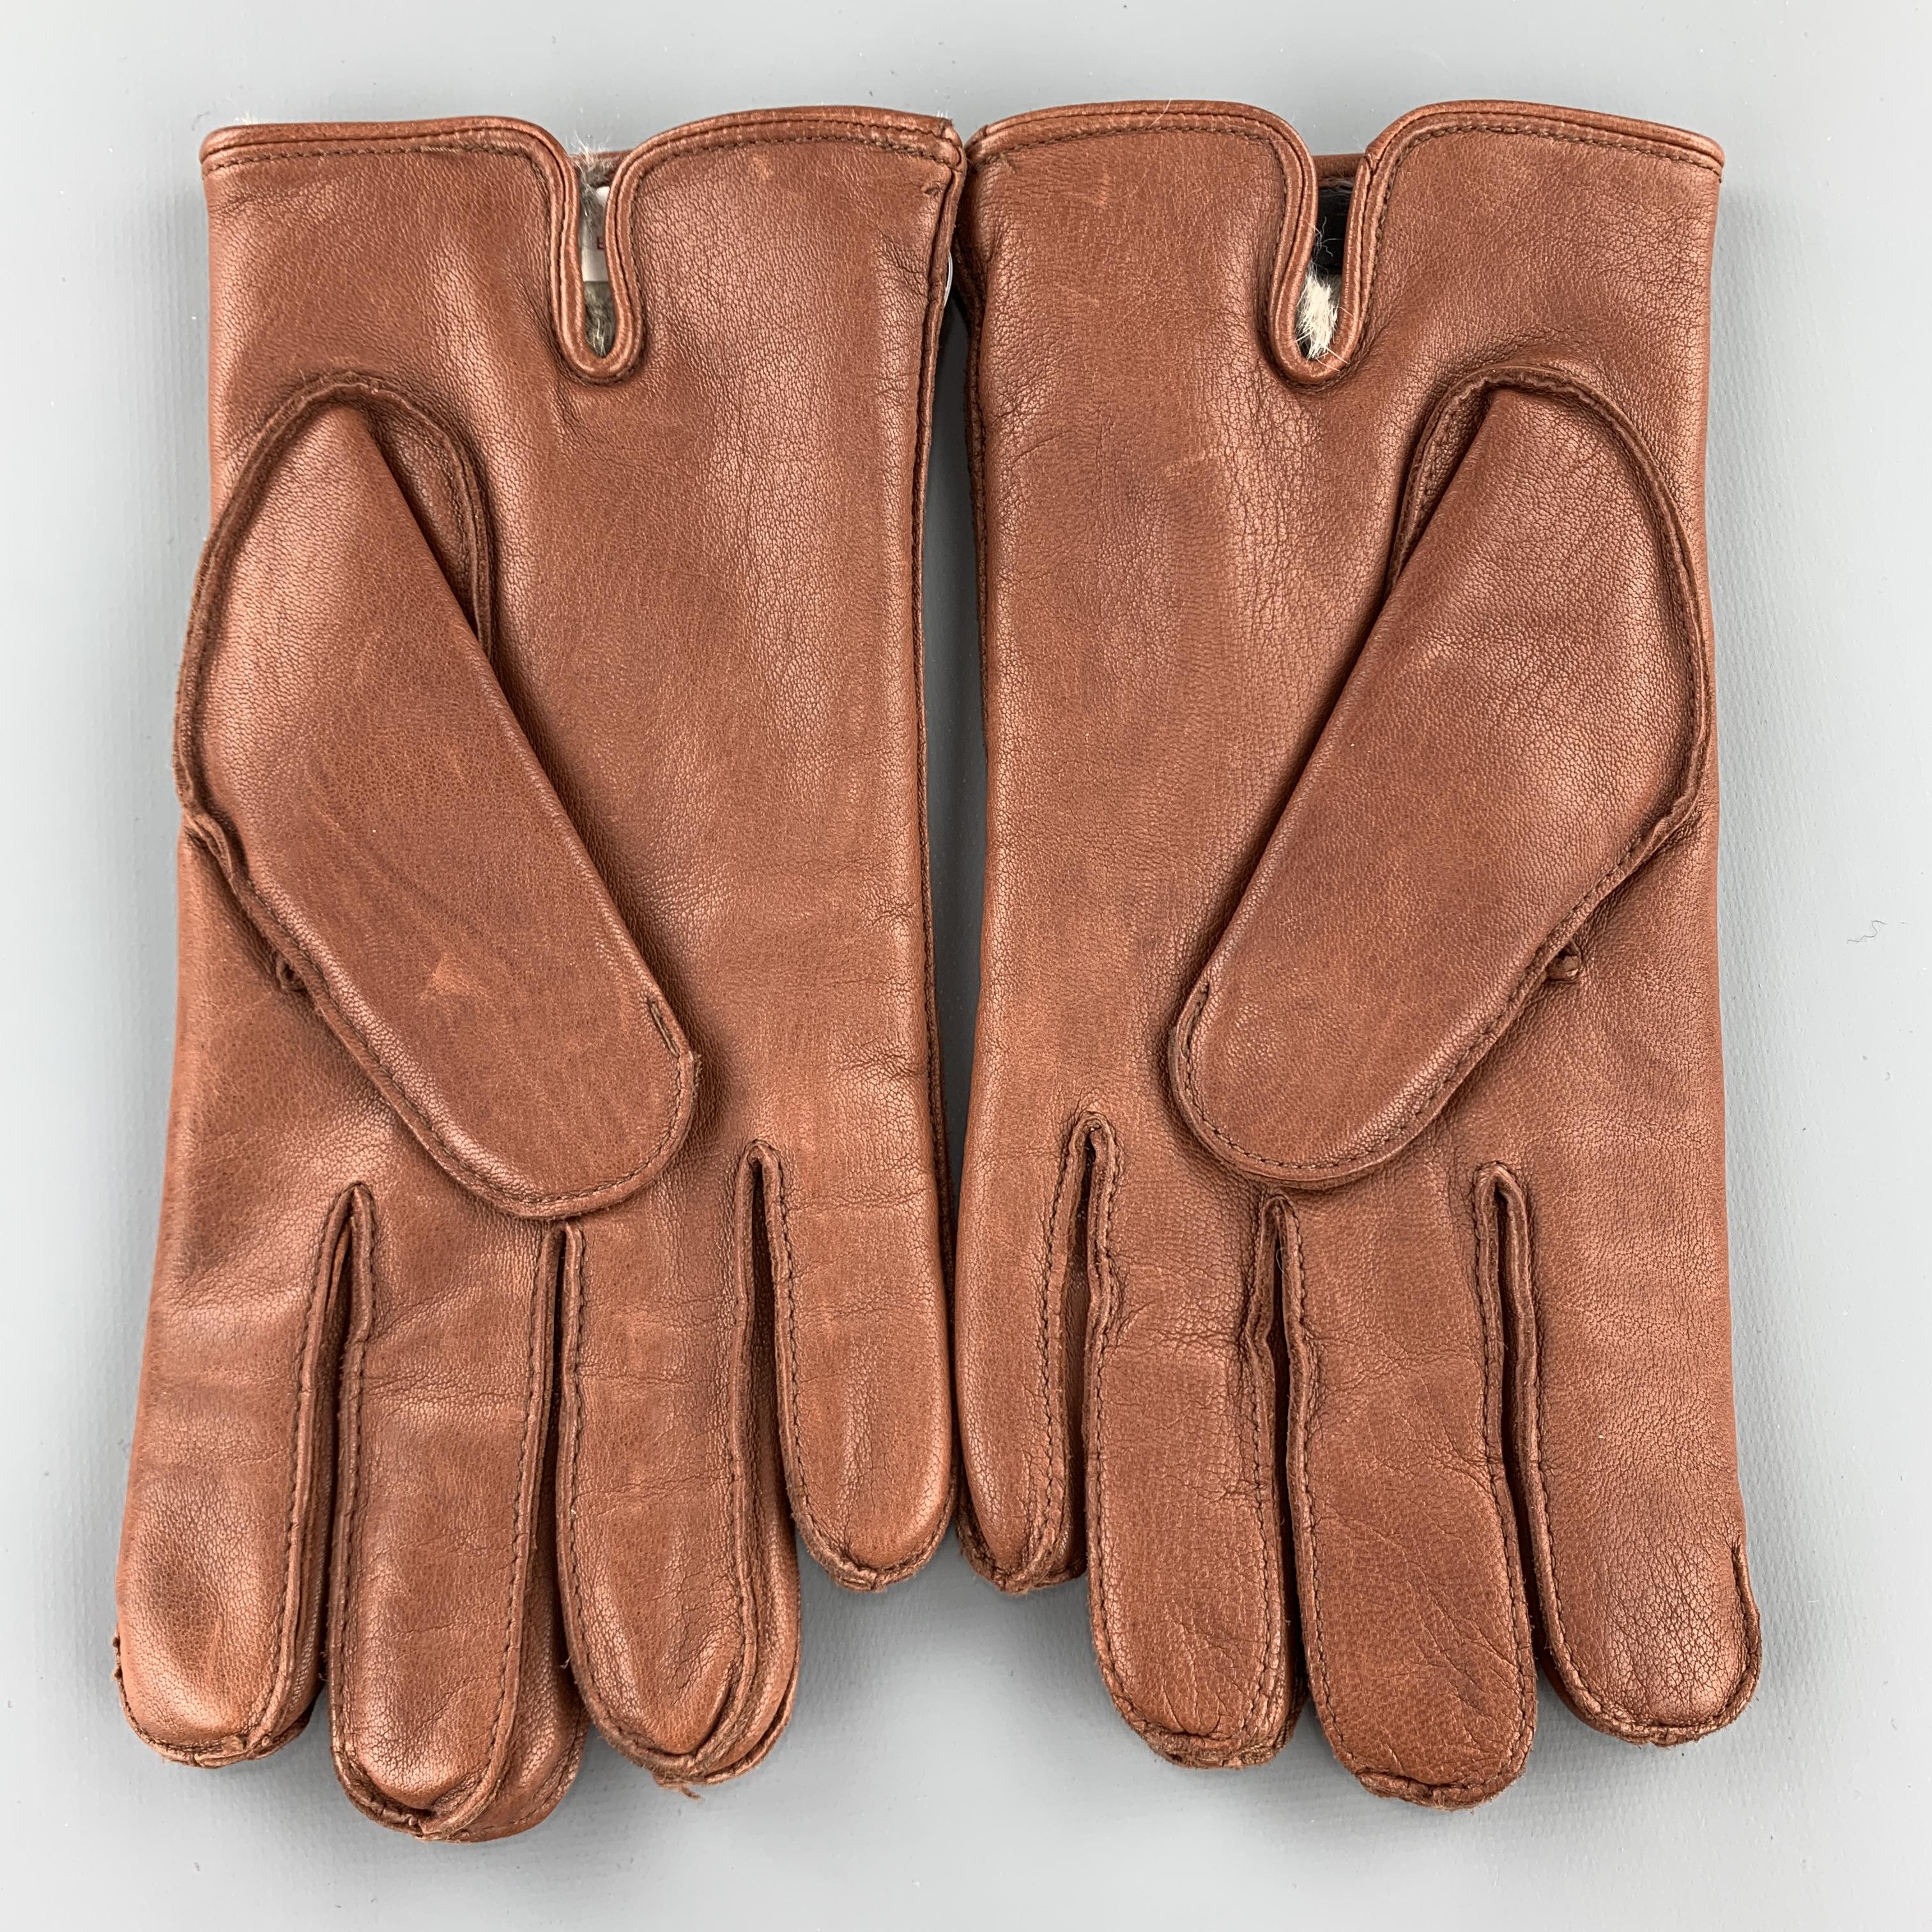 Vintage BROOKS BROTHERS gloves come in light tan brown leather with fur liner. 

Excellent Pre-Owned Condition.
Marked: S

Width: 4 in.
Length: 9.5 in.